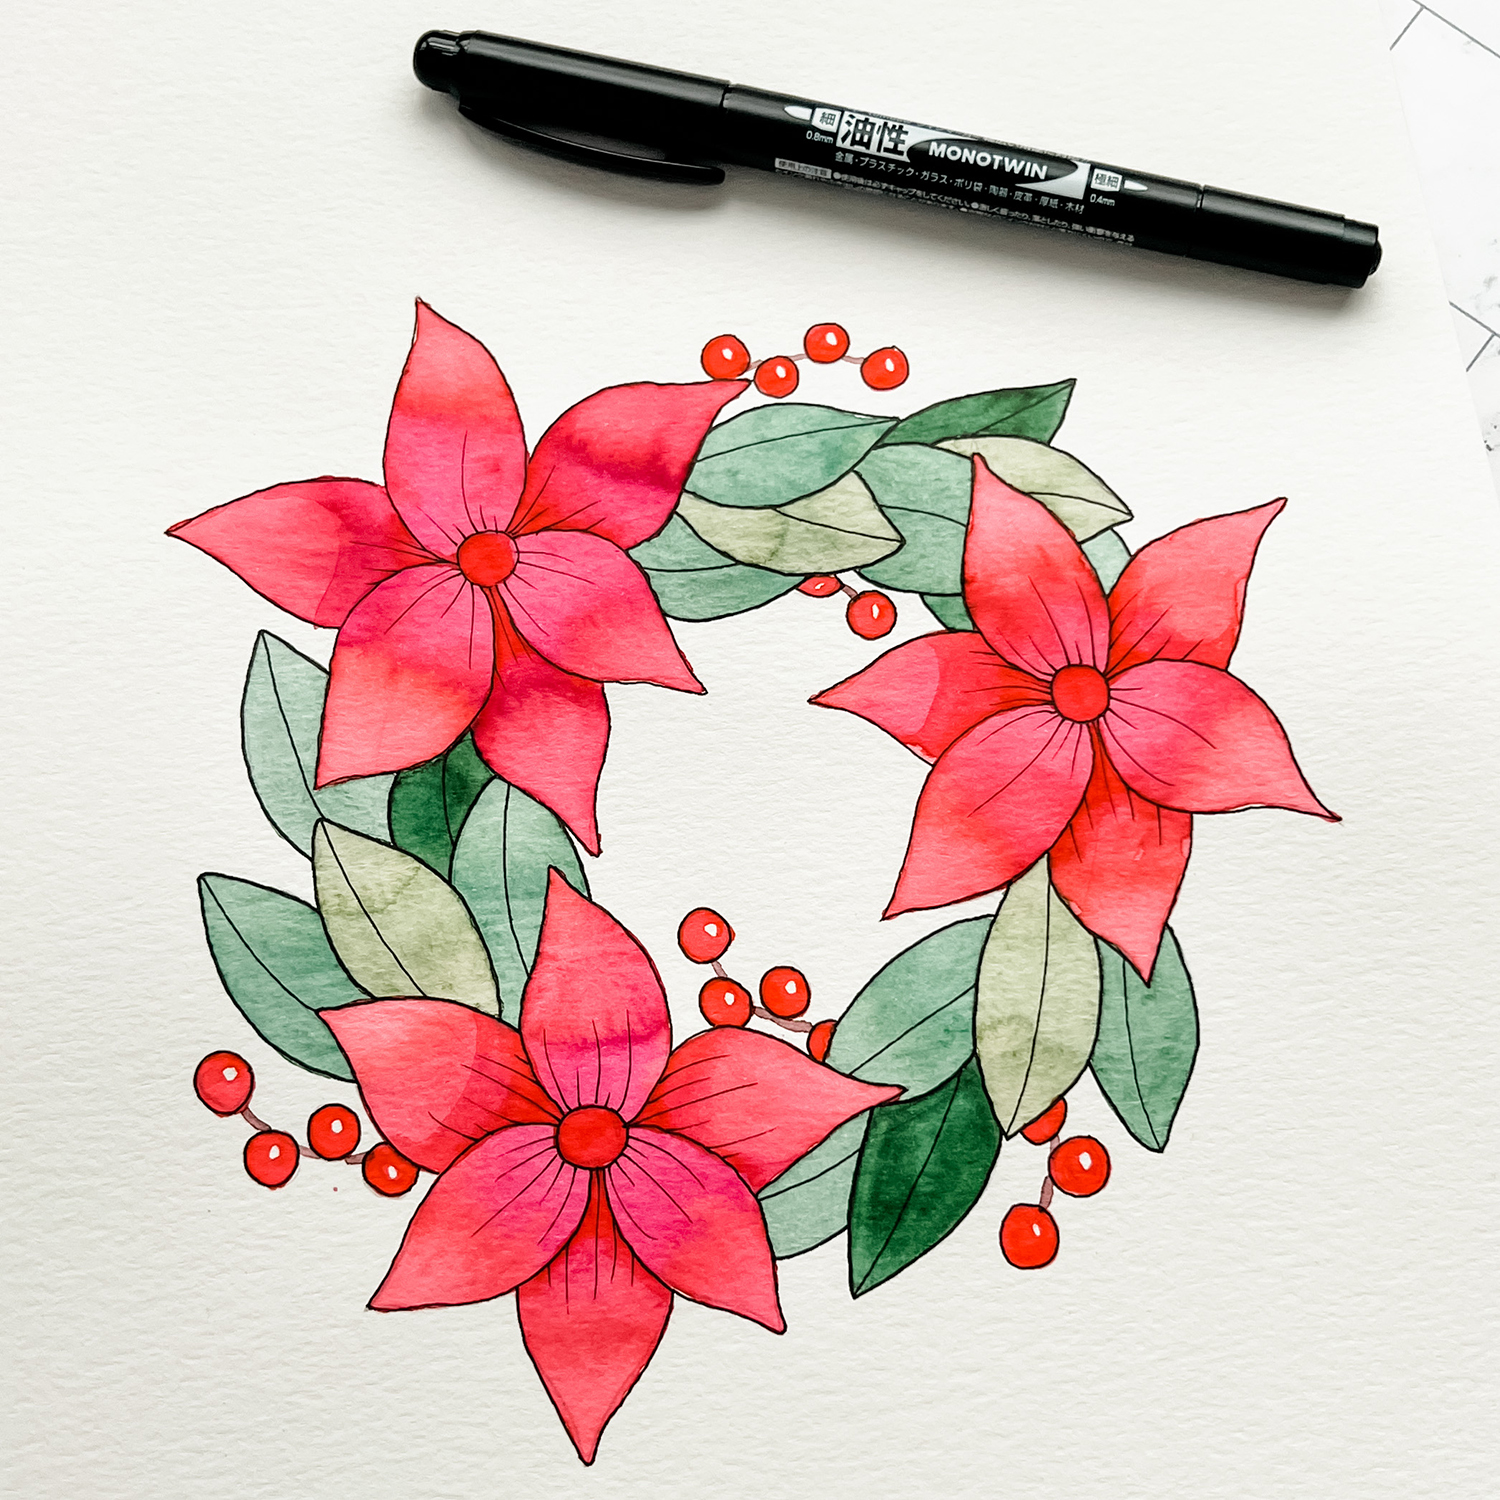 How to Watercolor with Tombow Brush Pens and Rubber Stamps - Tombow USA Blog